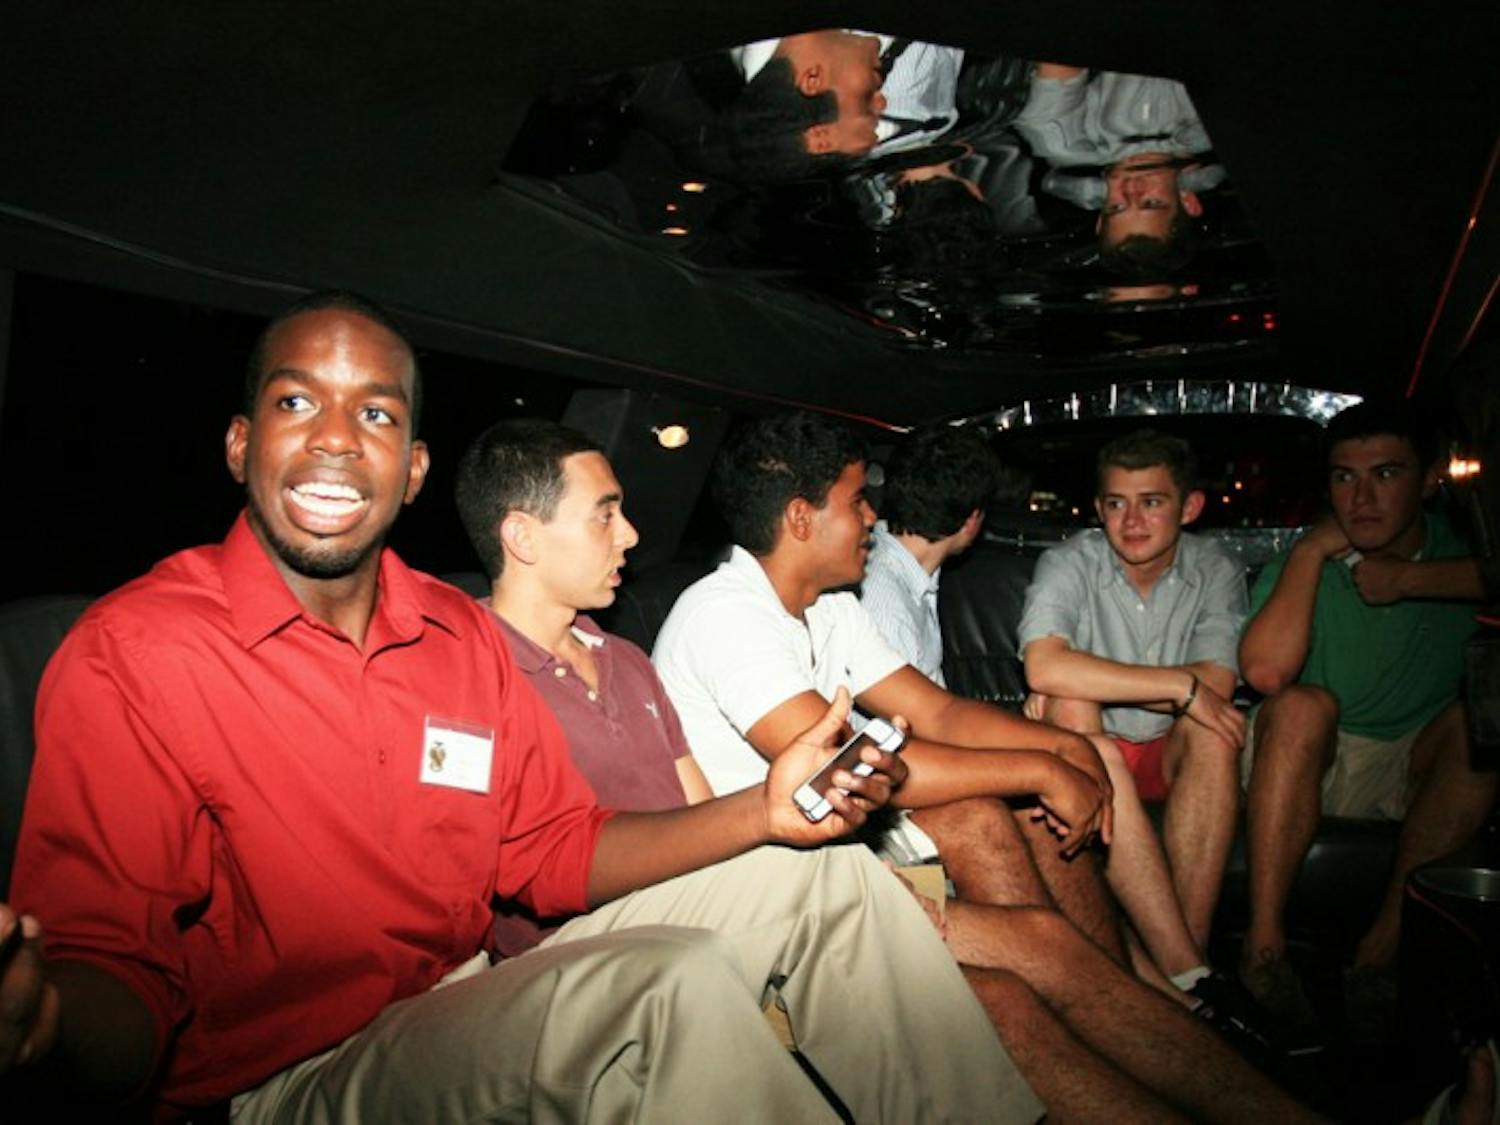 Dimittri Delevry, a 20-year-old political science junior and Theta Chi brother, rides in a limousine with potential new members of the fraternity.